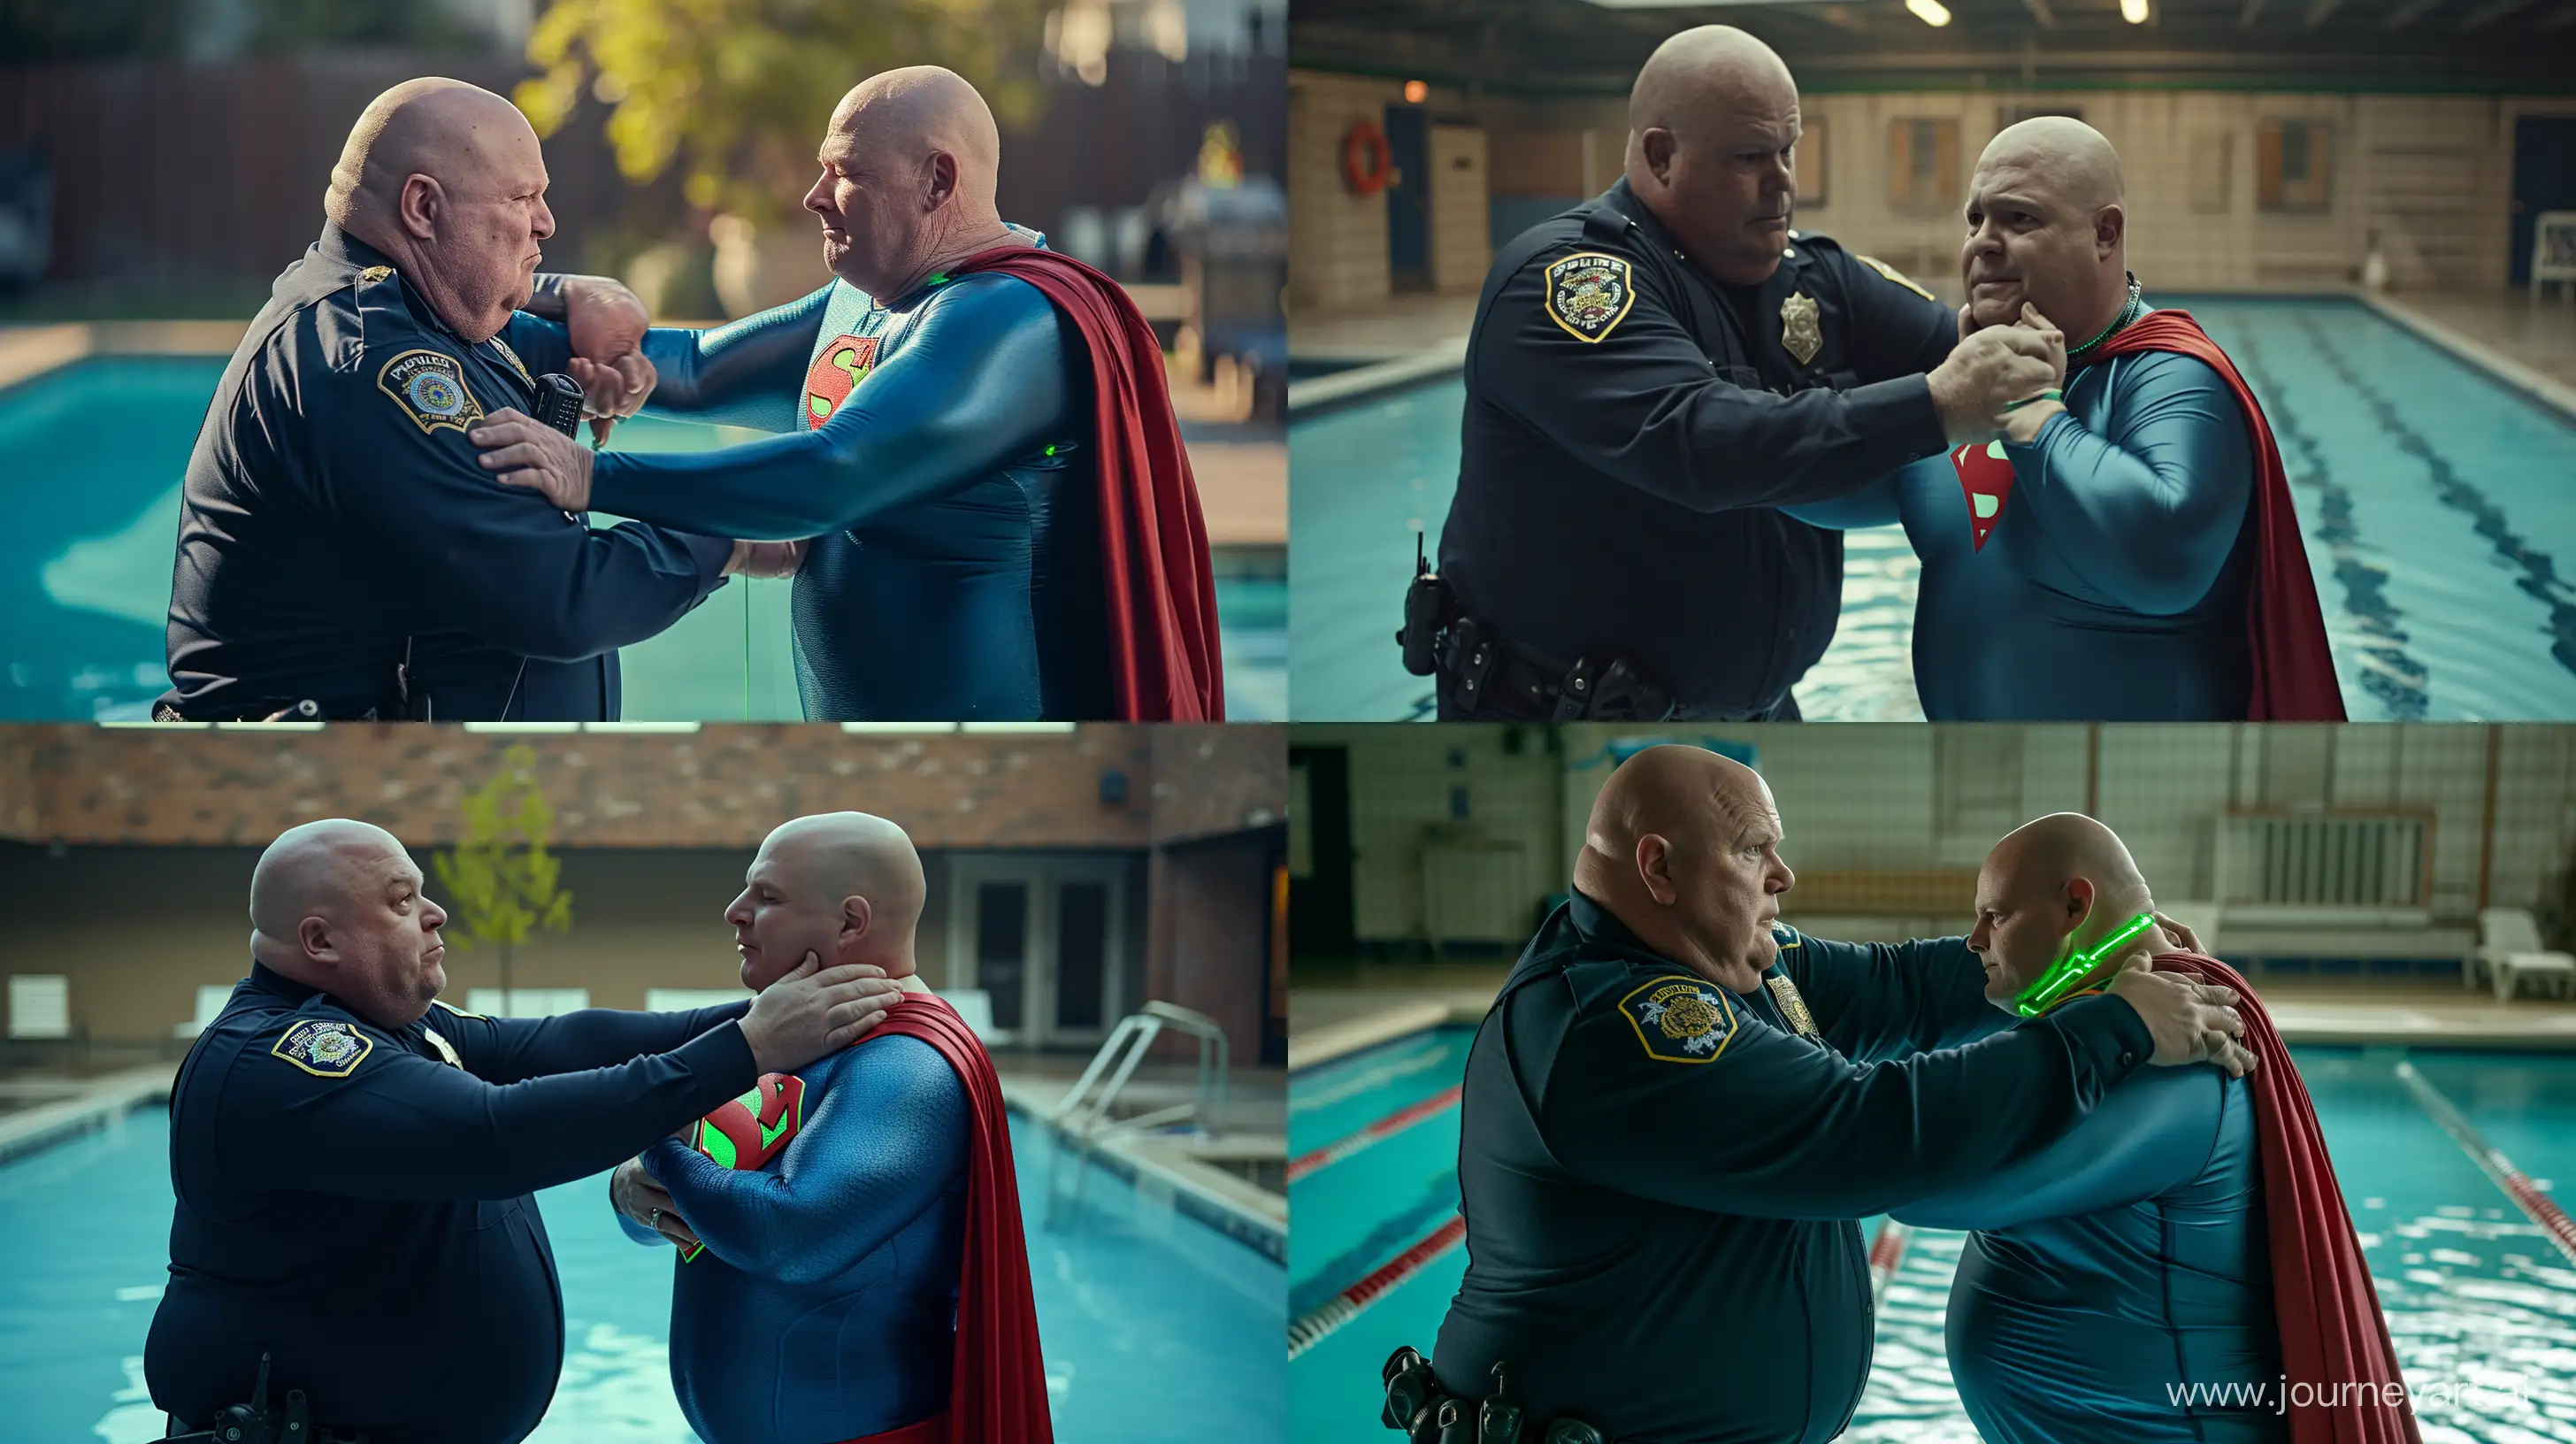 Serious-Police-Officer-Pins-Superman-in-Poolside-Showdown